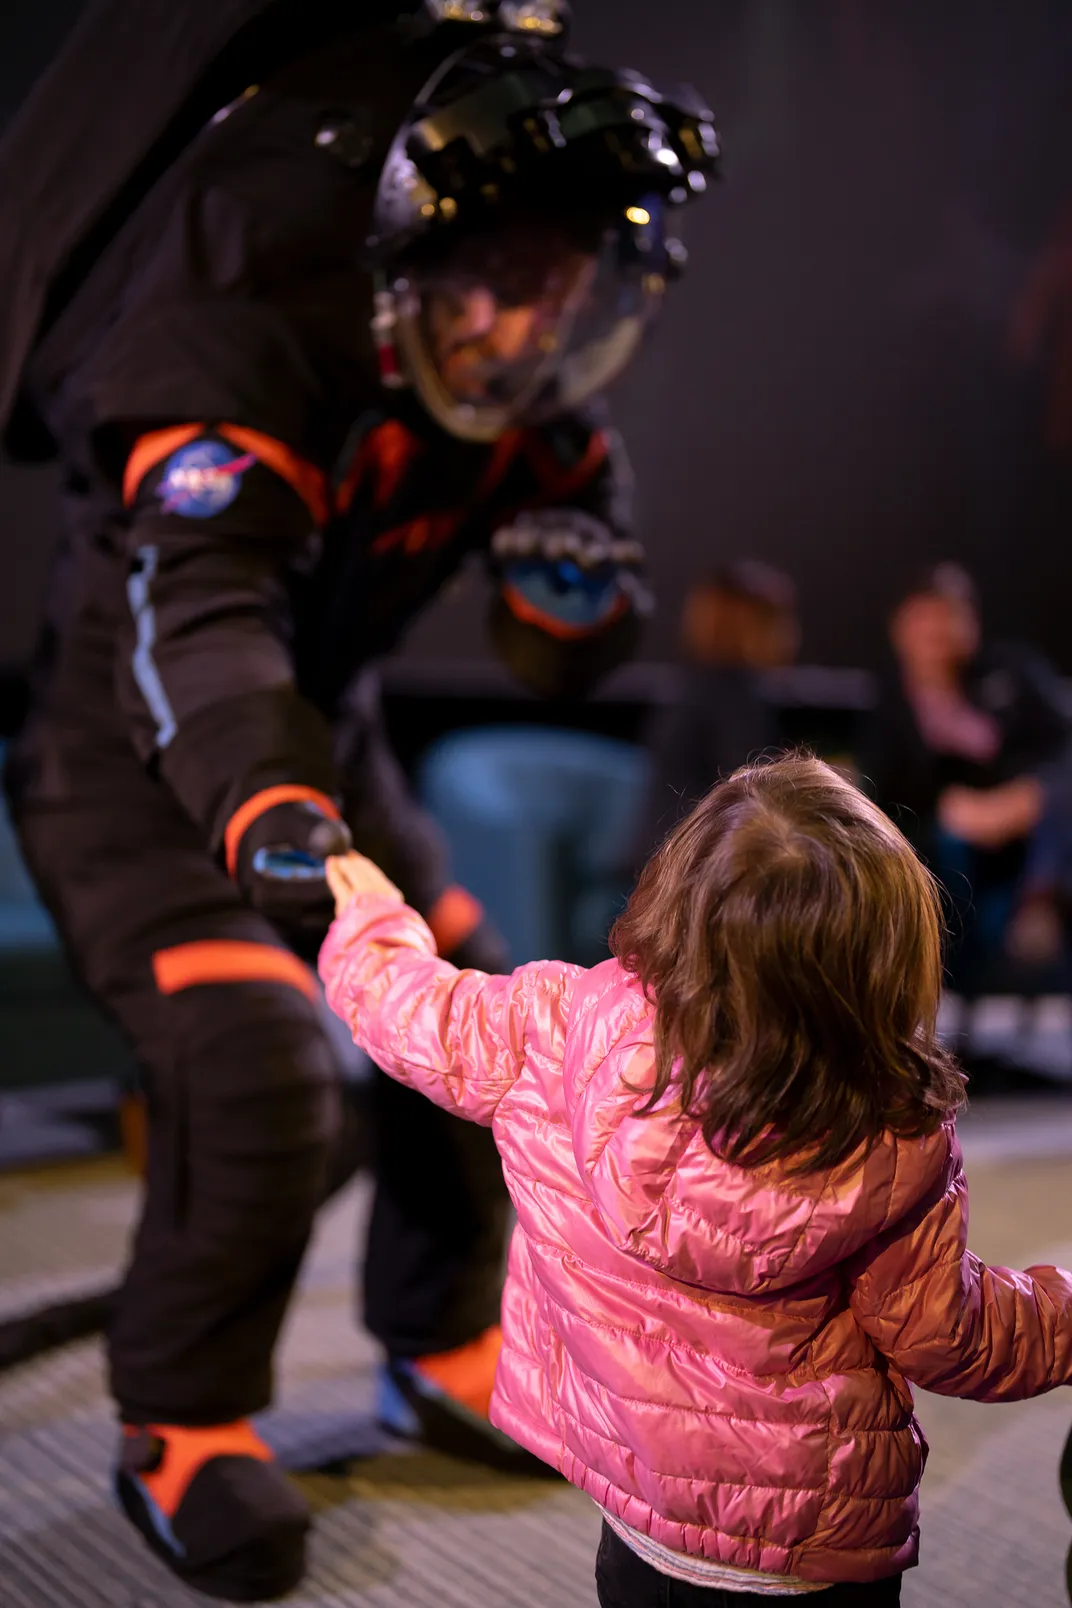 Man in spacesuit shaking hands with little girl in pink coat